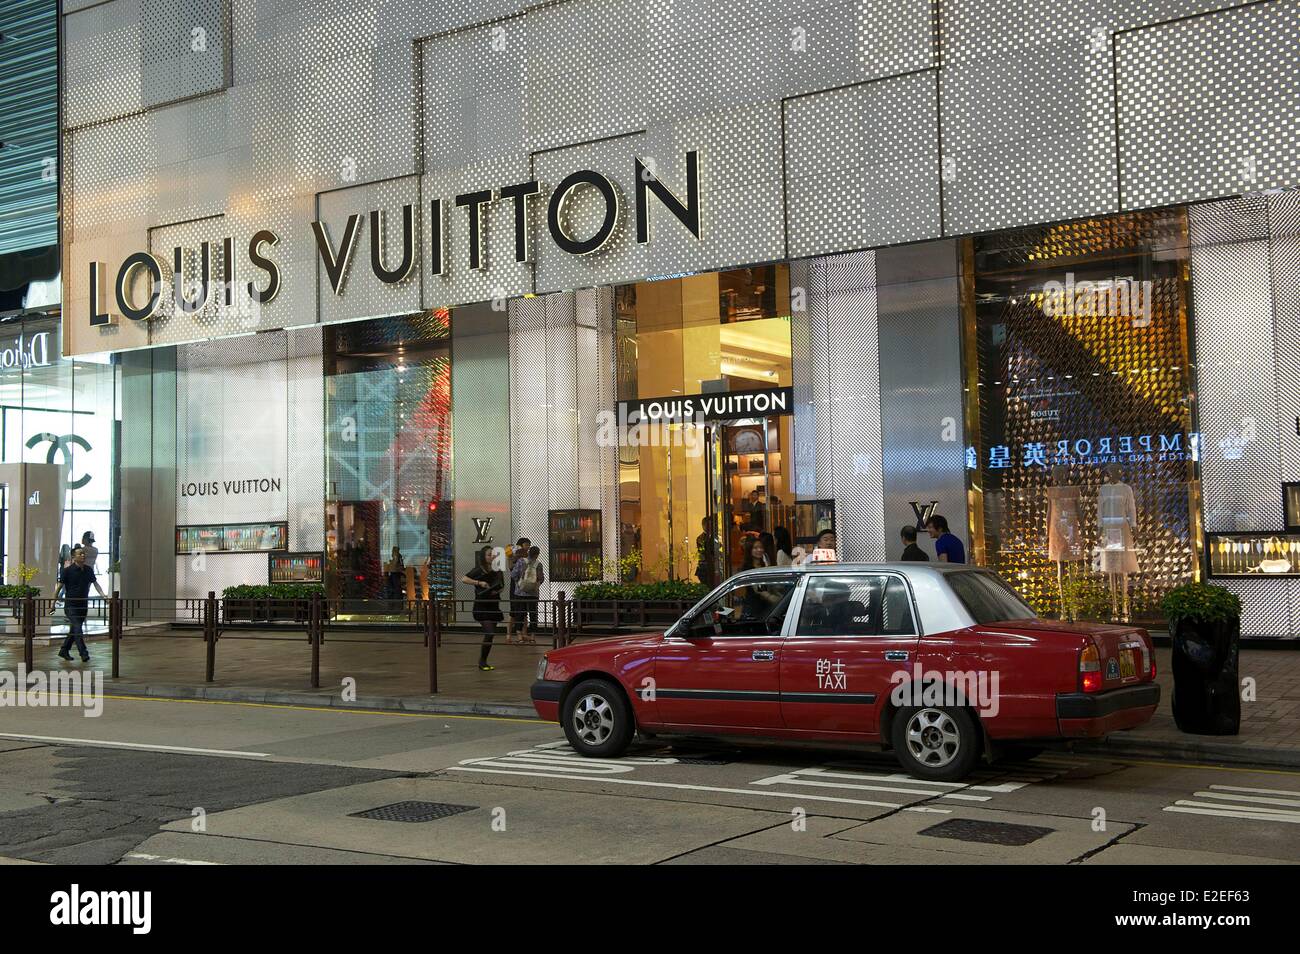 louis vuitton luxury fashion house store in central district, hong